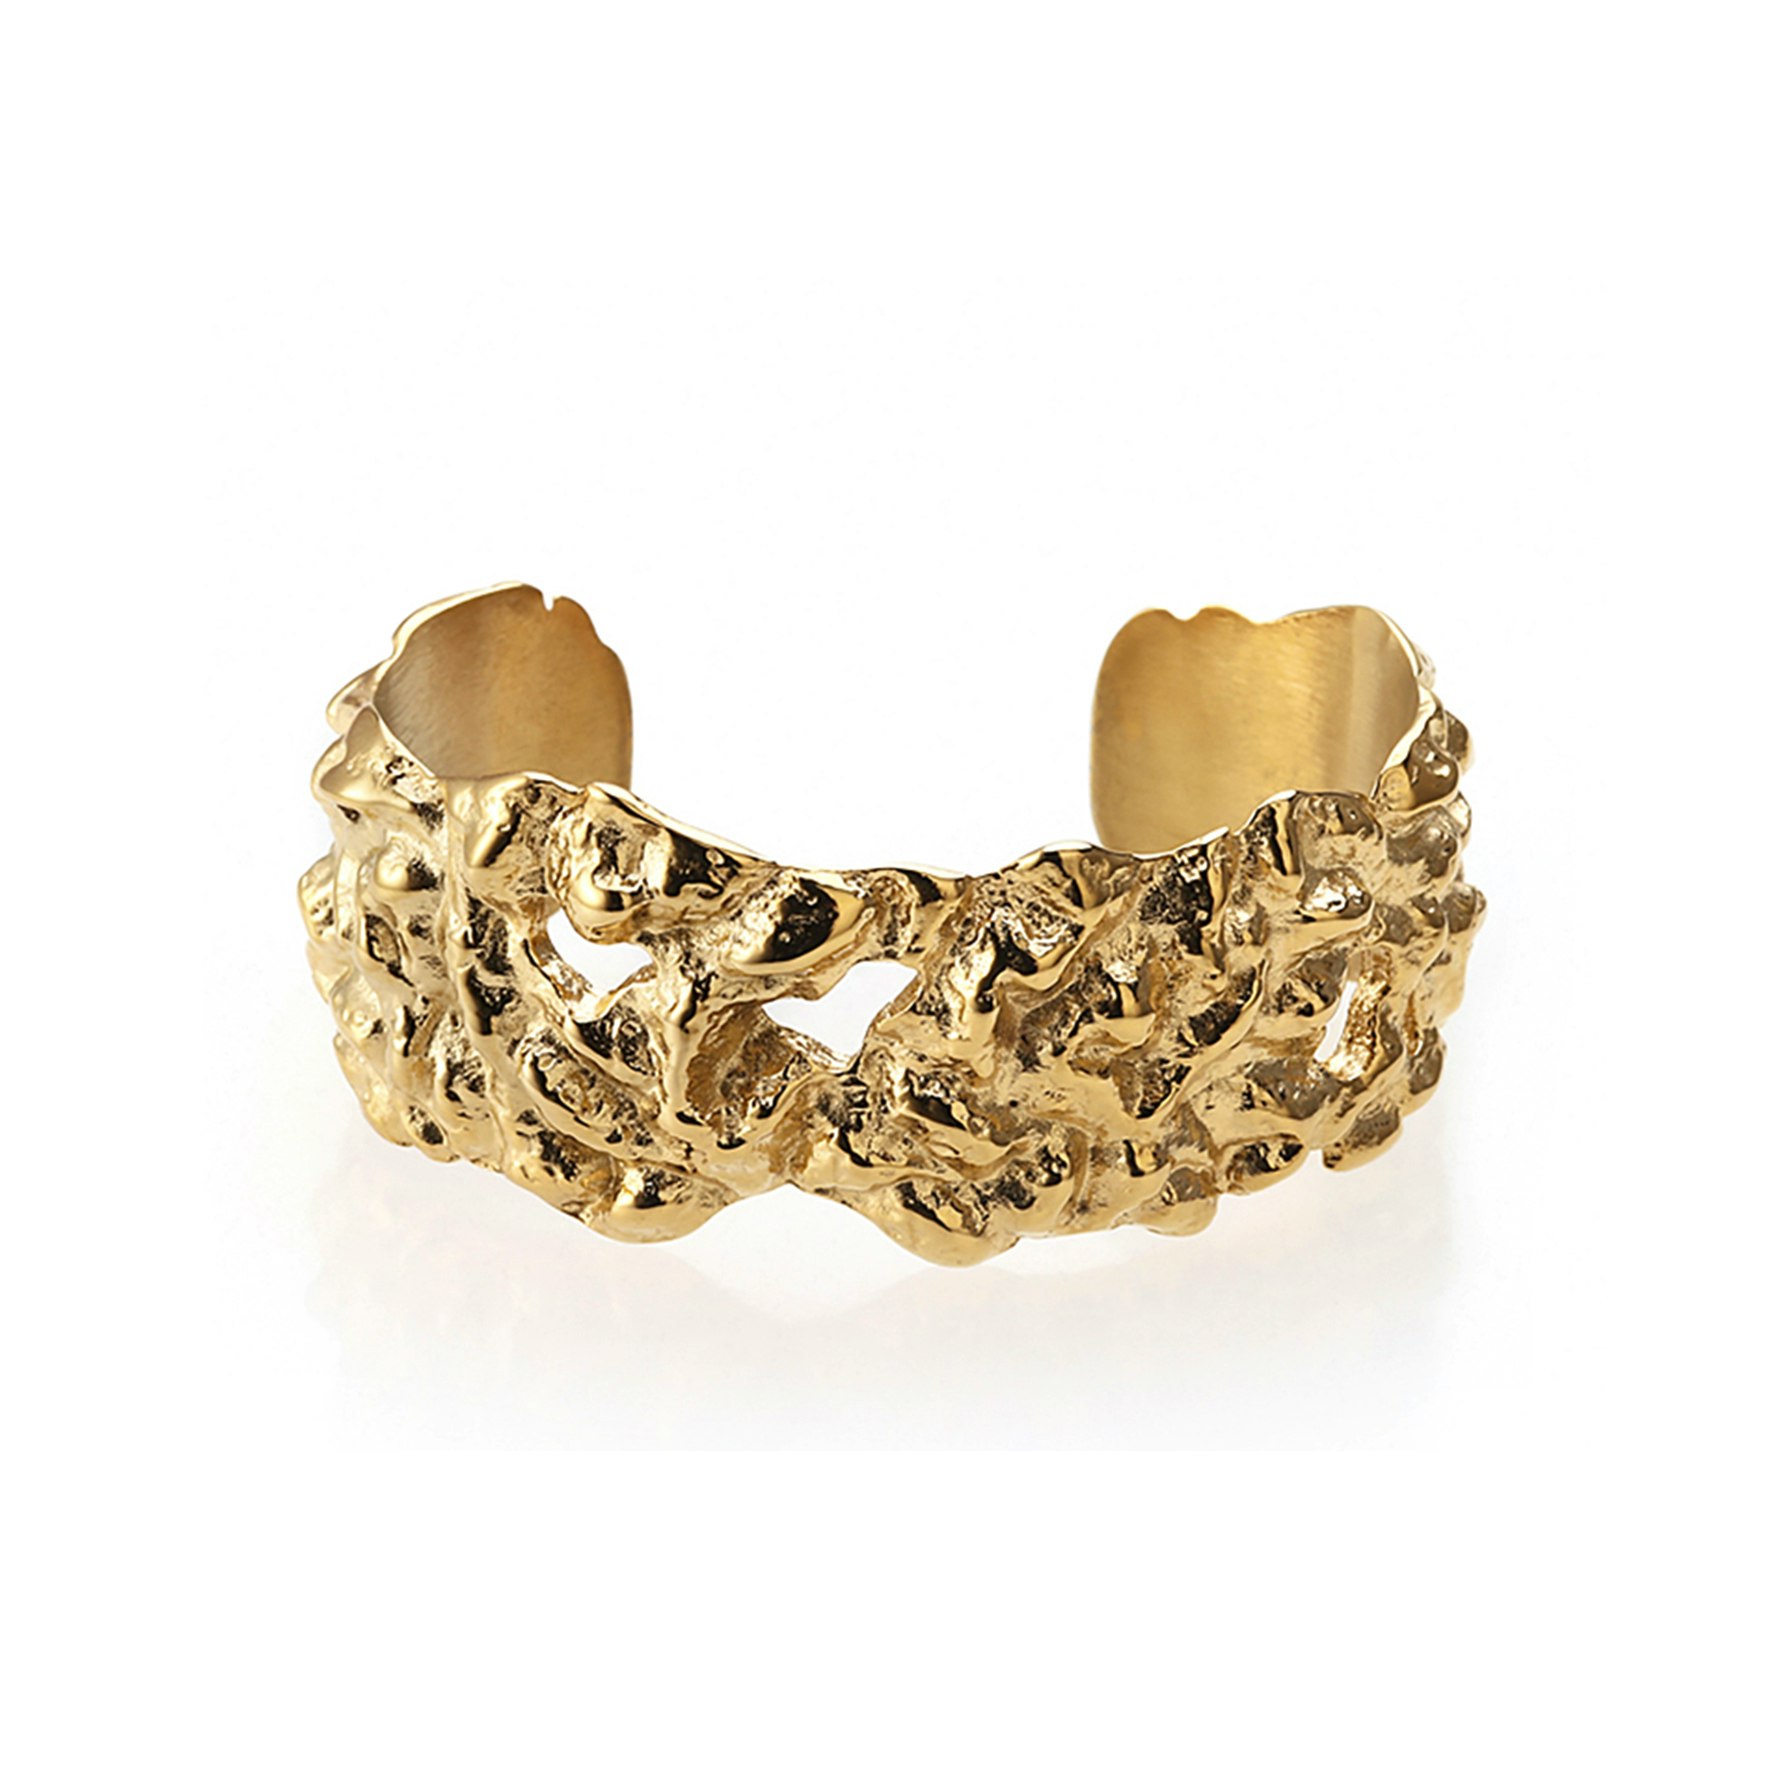 Xenia x Sistie 2nd Chunky Bracelet from Sistie 2nd in Goldplated stainless steel